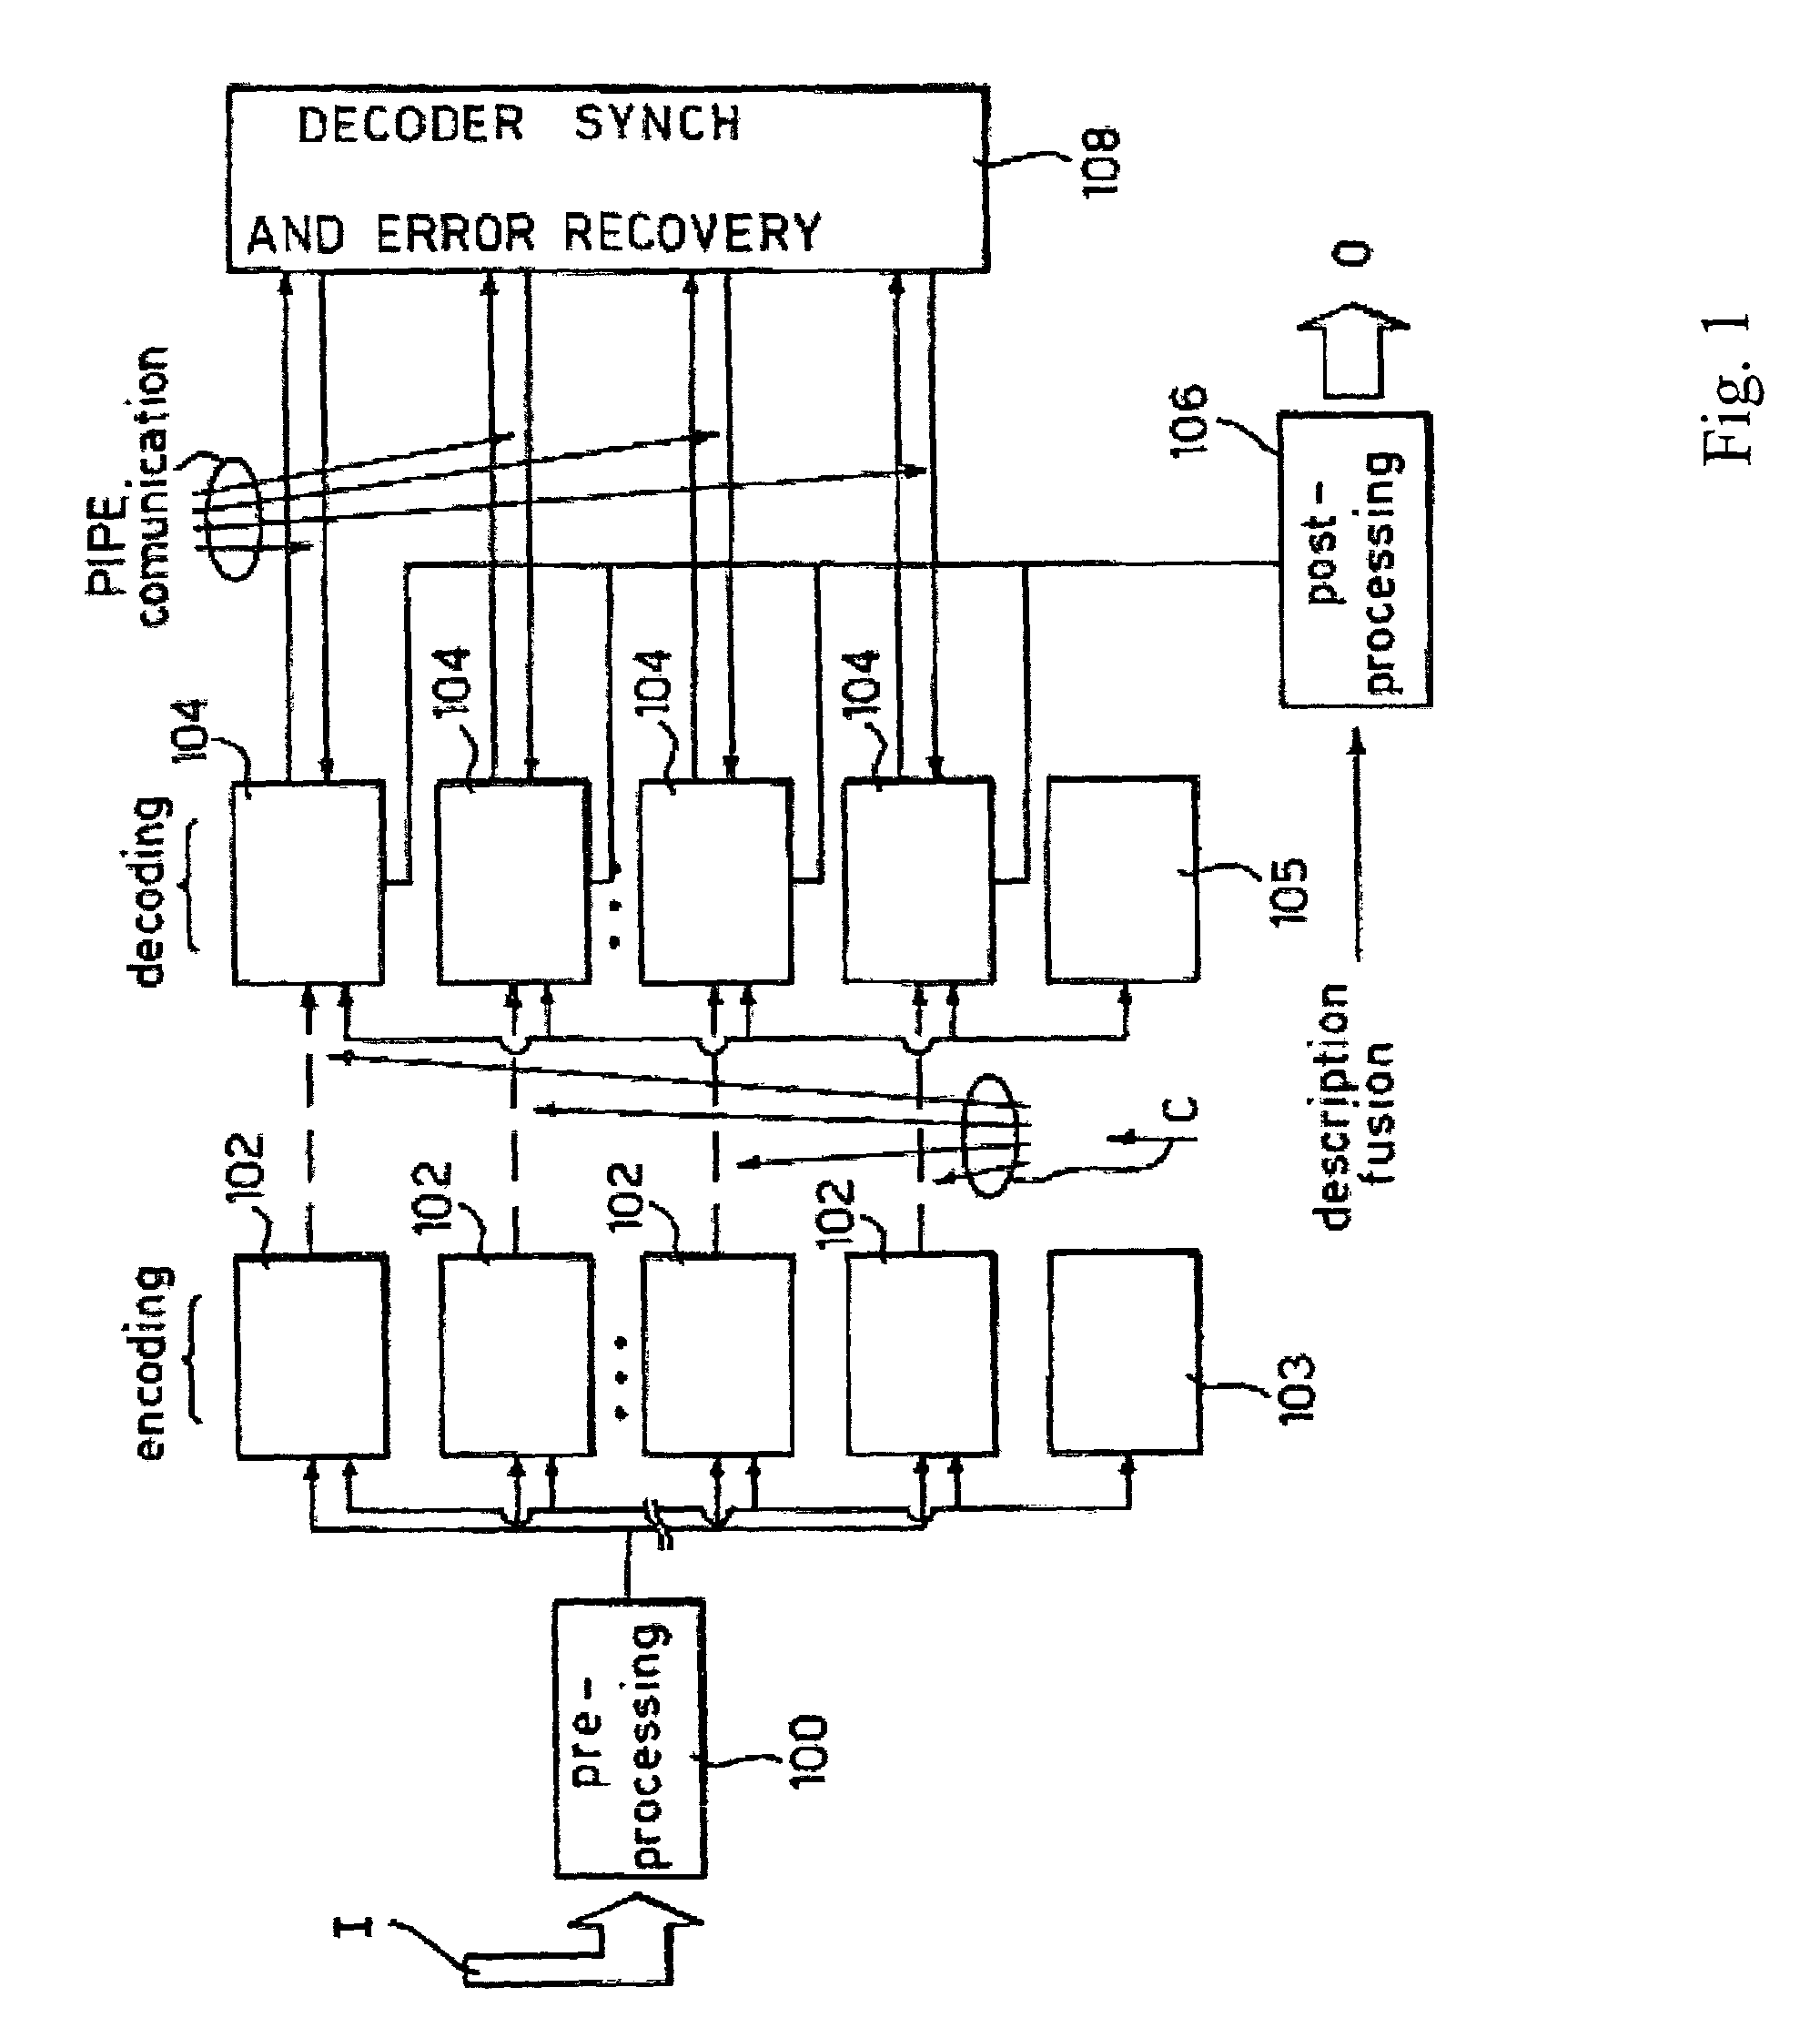 Method for encoding/decoding signals with multiple descriptions vector and matrix